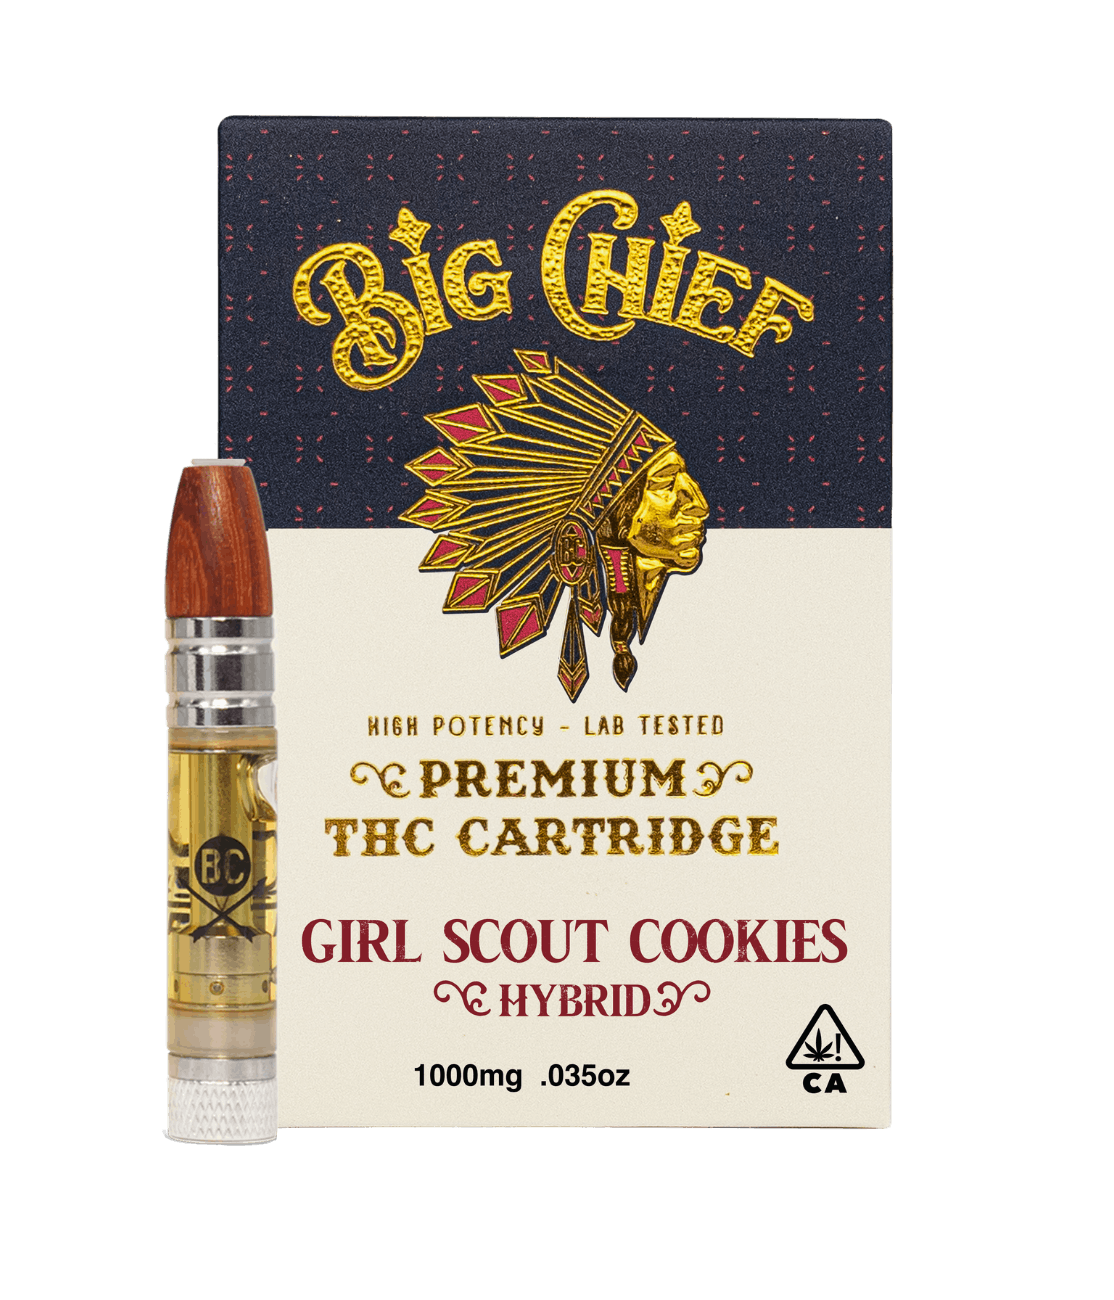 Big Chief | Girl Scout Cookies | Hybrid